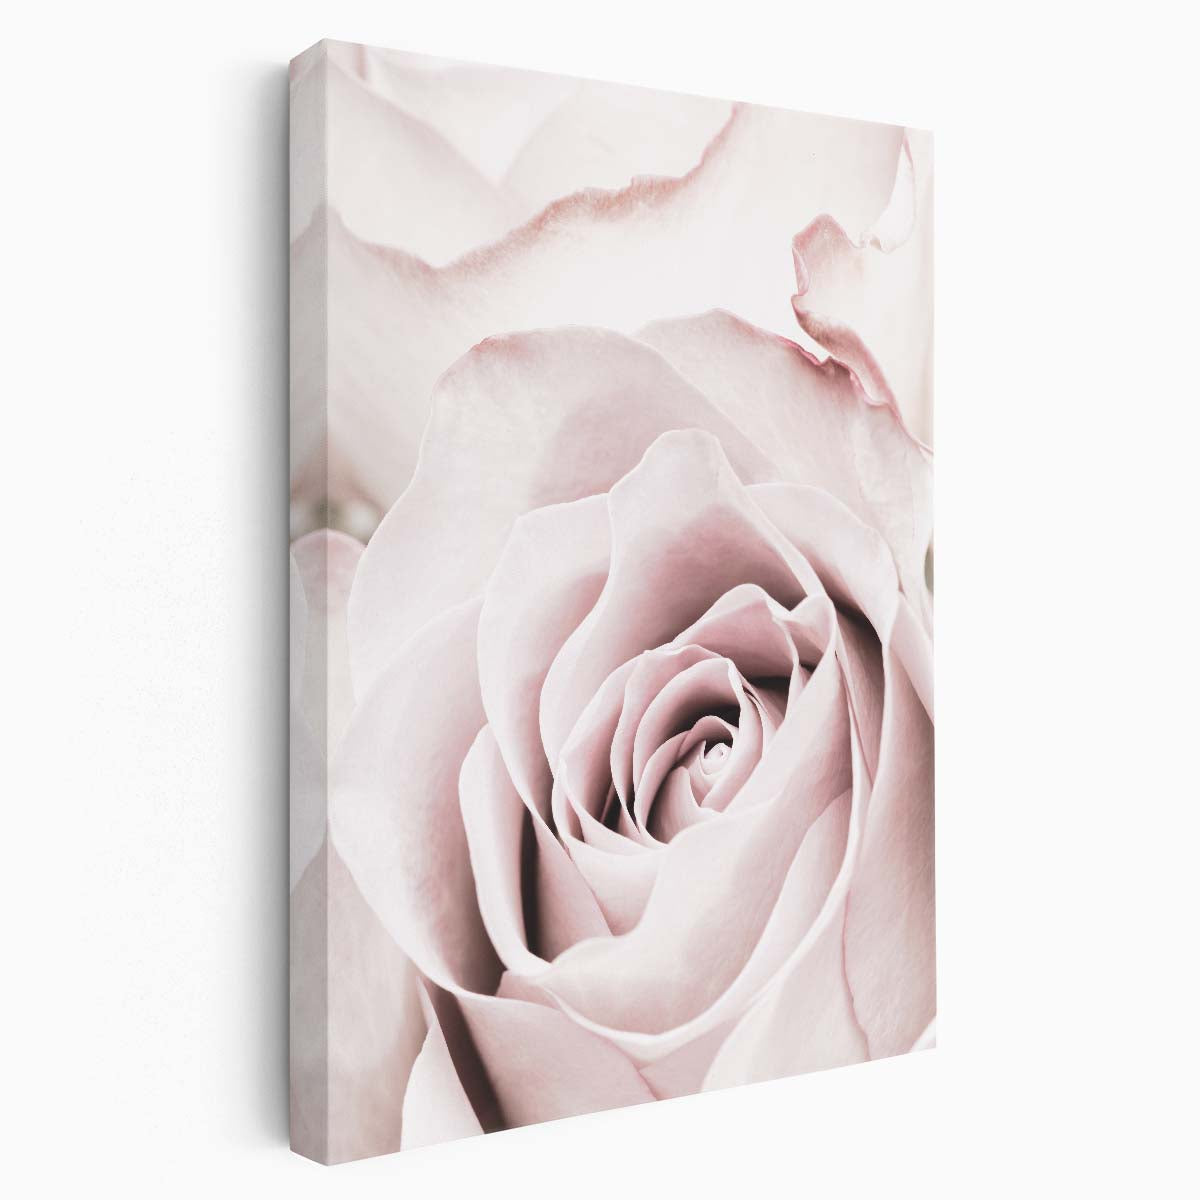 Romantic Pastel Pink Rose Macro Photography Wall Art by Luxuriance Designs, made in USA